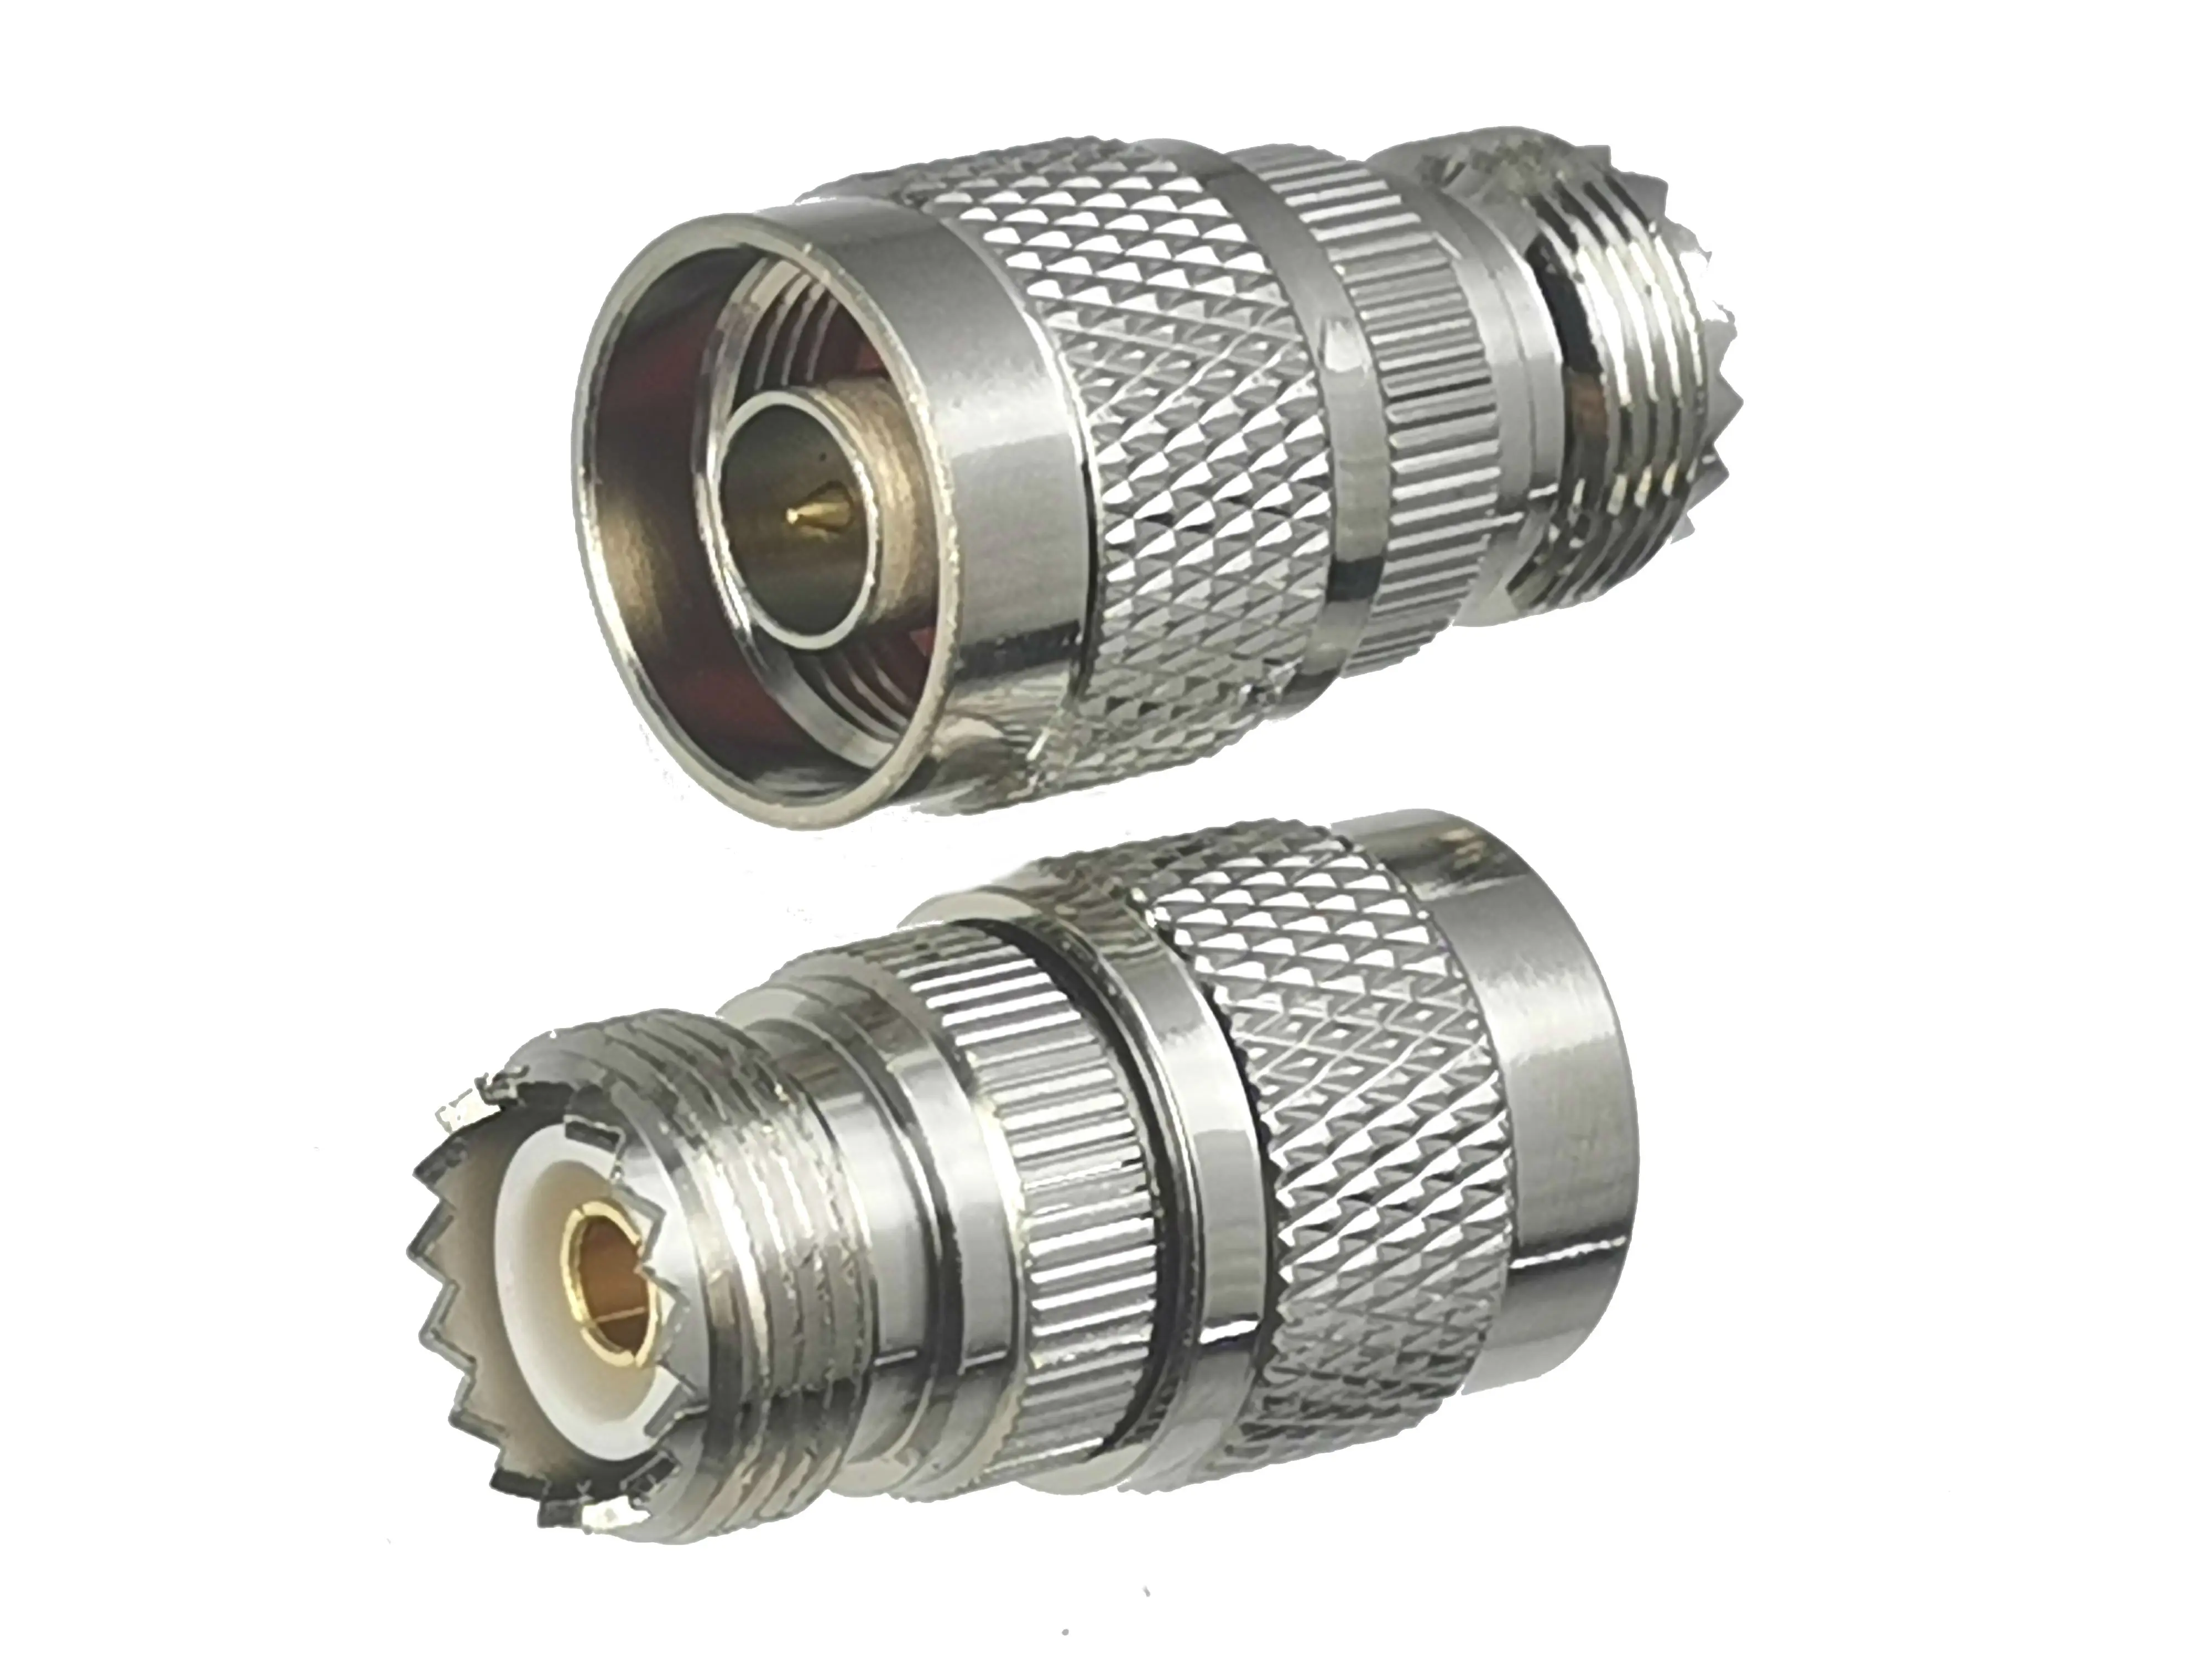 1pcs-connector-adapter-n-male-plug-to-uhf-so239-female-jack-rf-coaxial-converter-straight-new